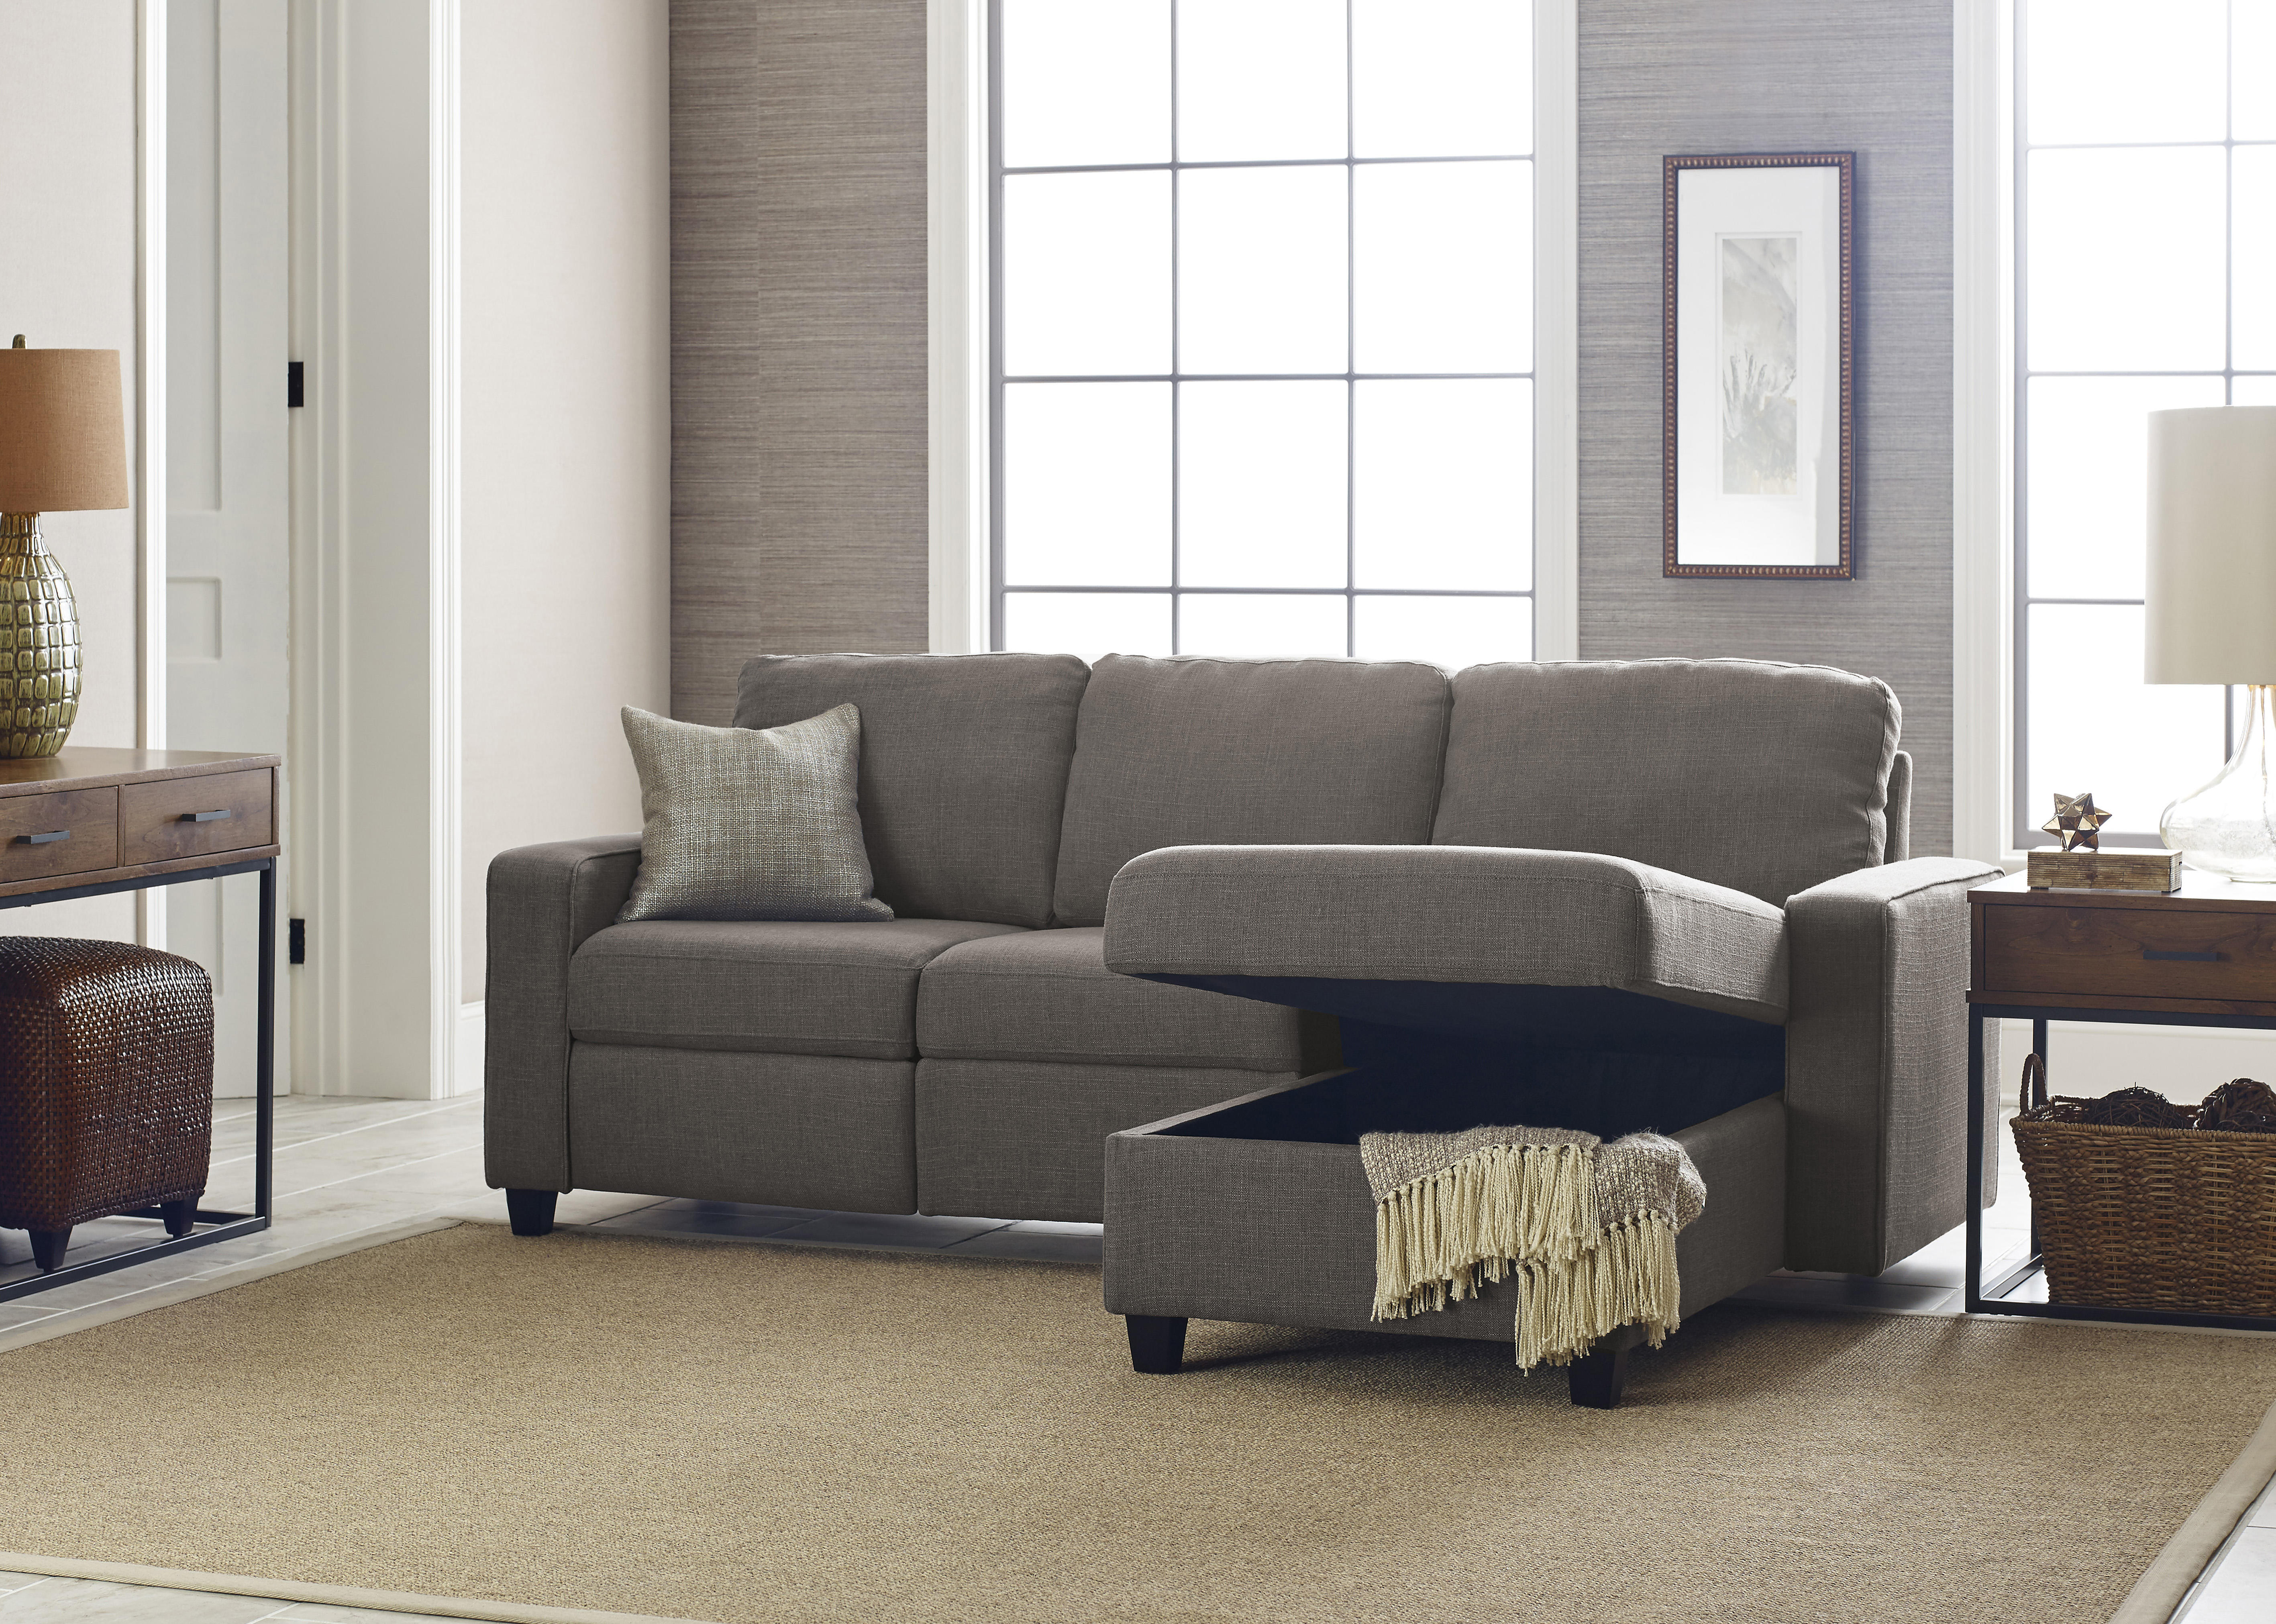 Serta Palisades Reclining Sectional with Right Storage Chaise - Gray - image 2 of 9